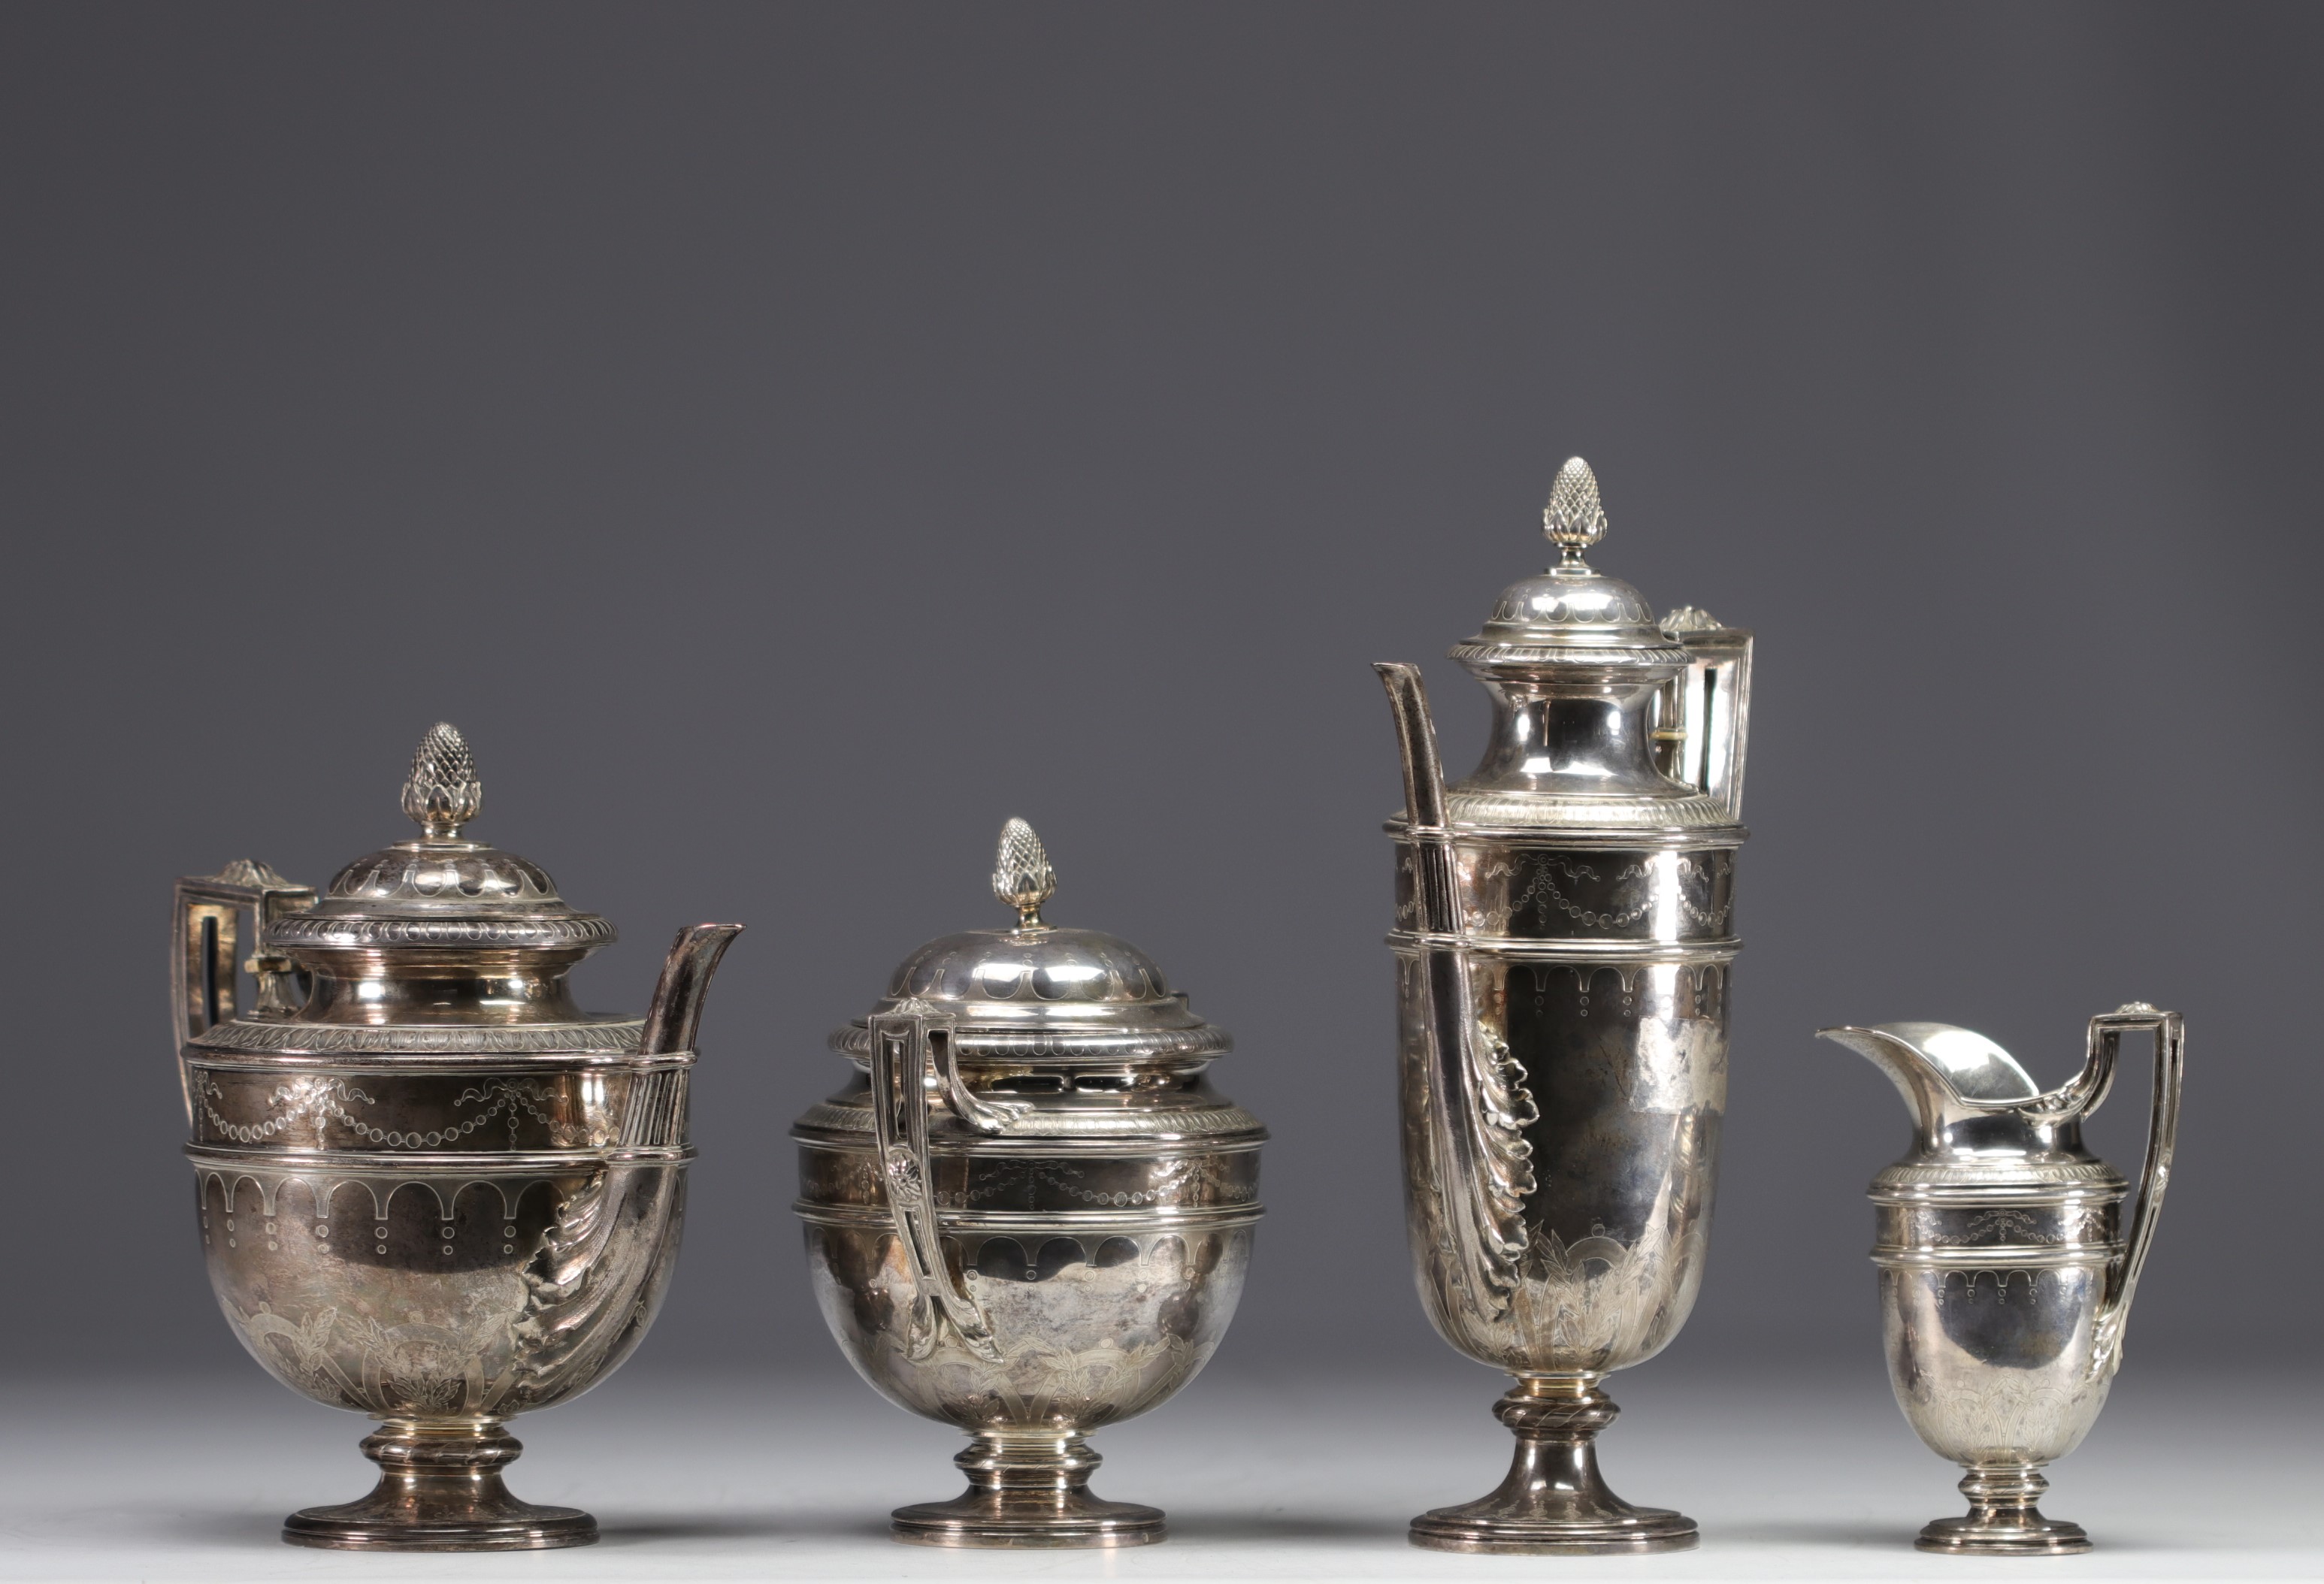 Jean-Baptiste Claude ODIOT a PARIS - Solid silver coffee service. - Image 7 of 11